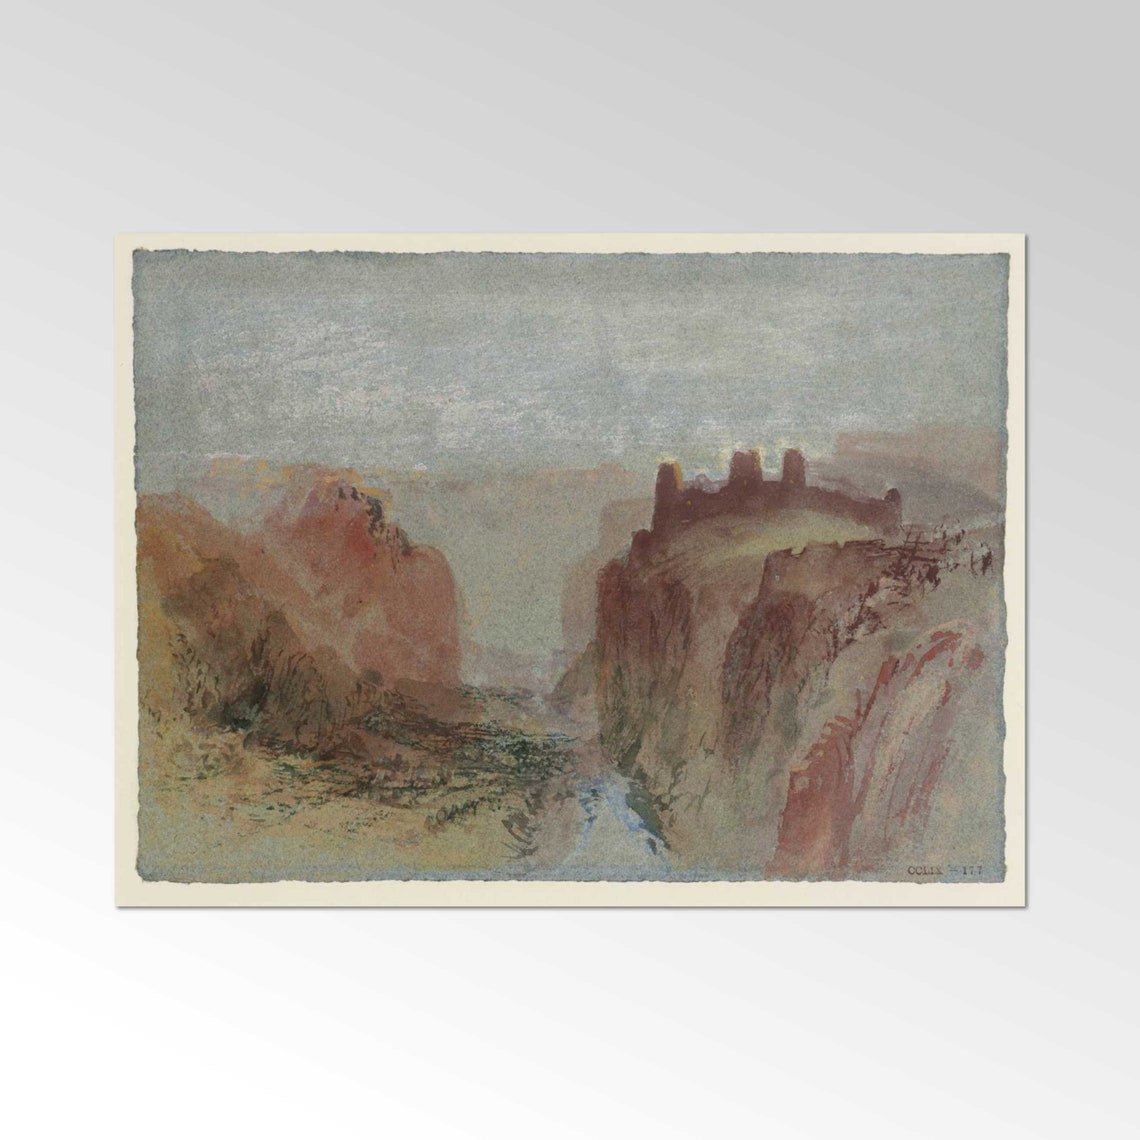 J. M. W. TURNER - While In Luxembourg City